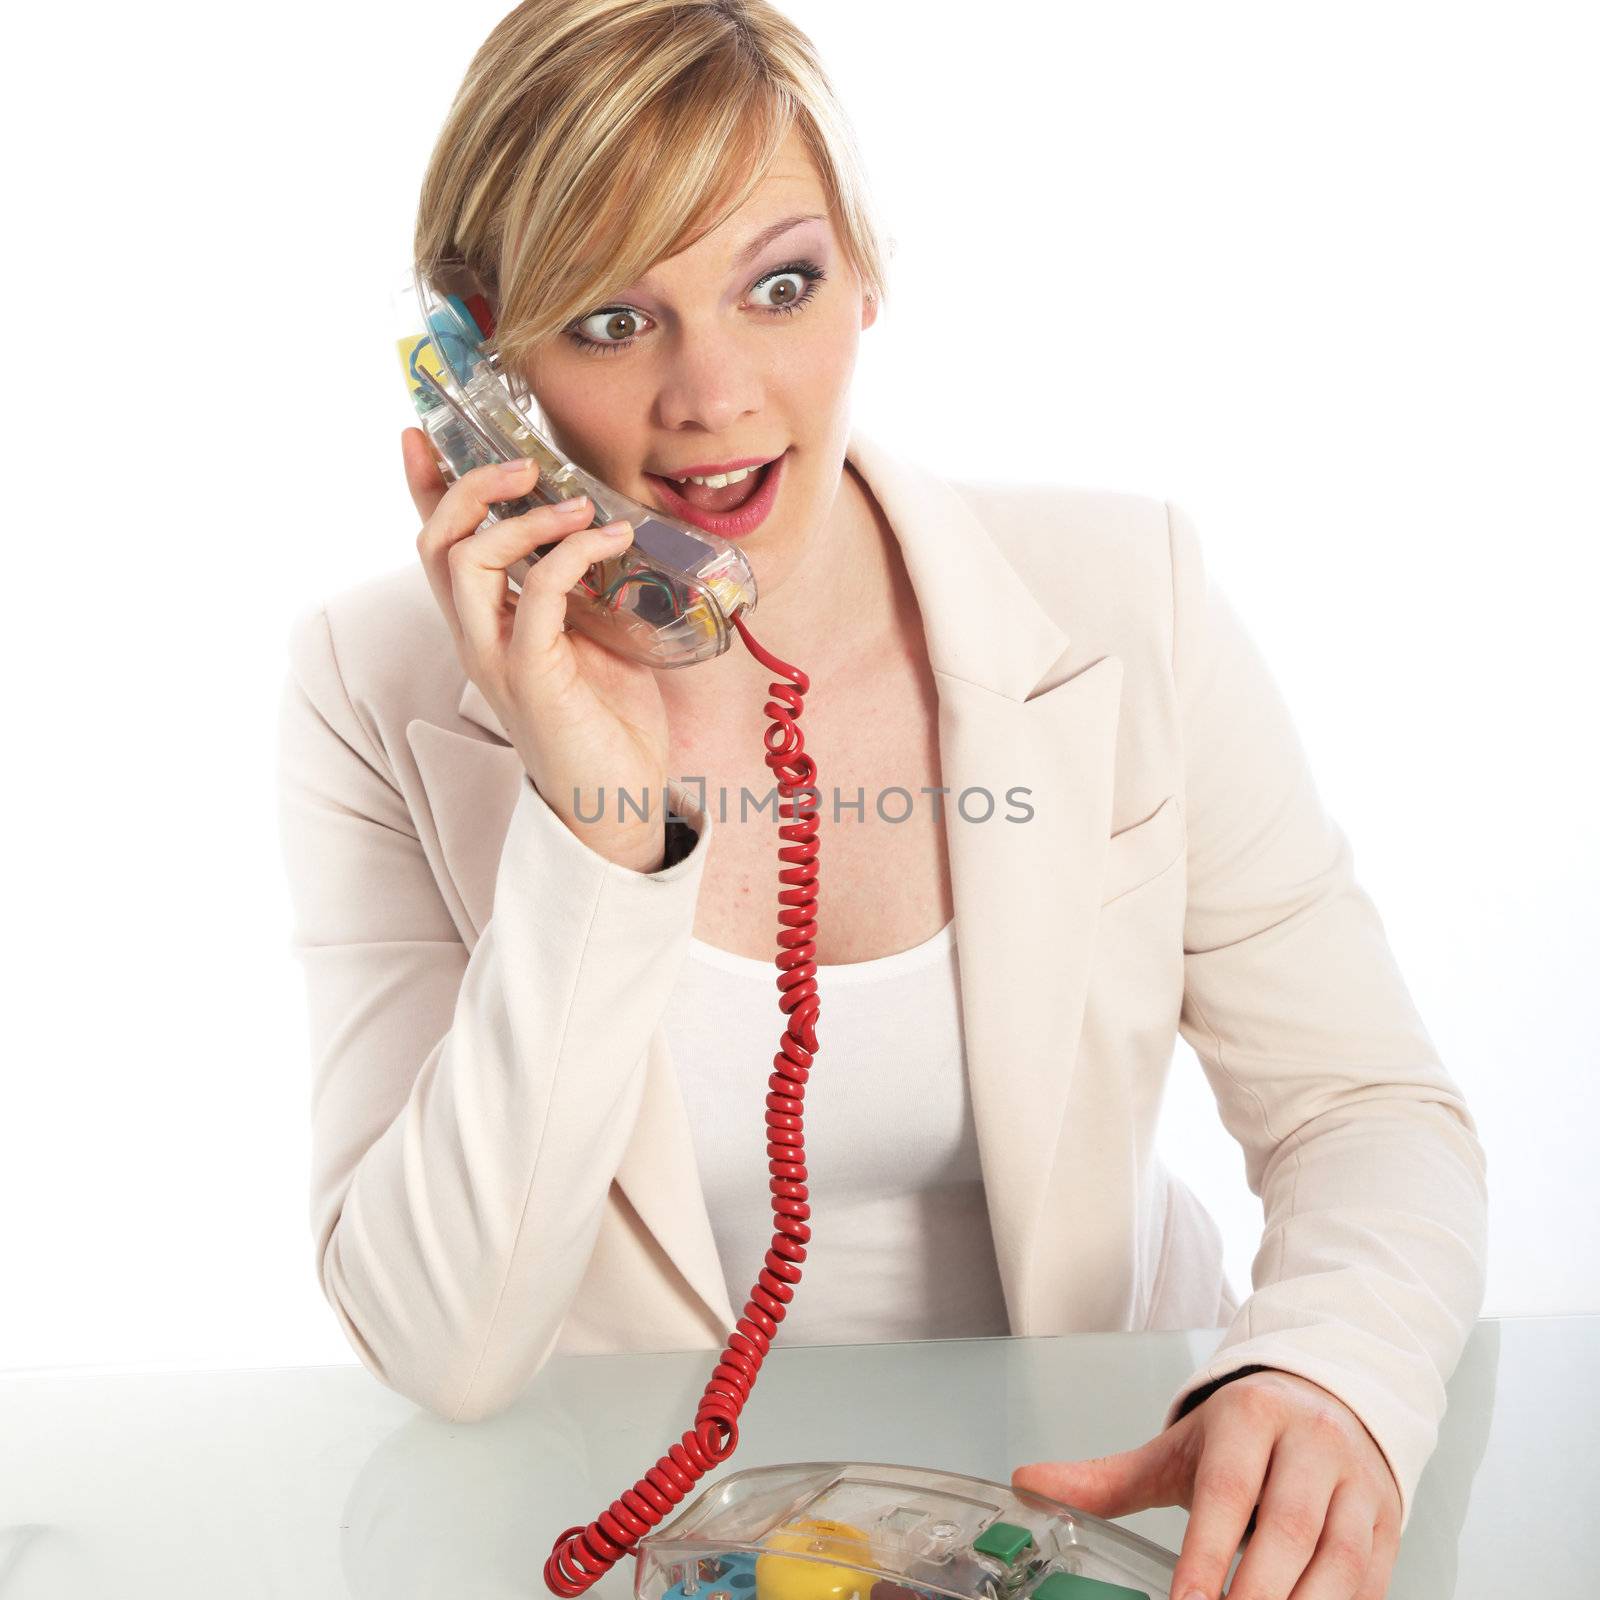 Surprised young woman with a wide-eyed expression talking on a landline telephone while sitting at a table